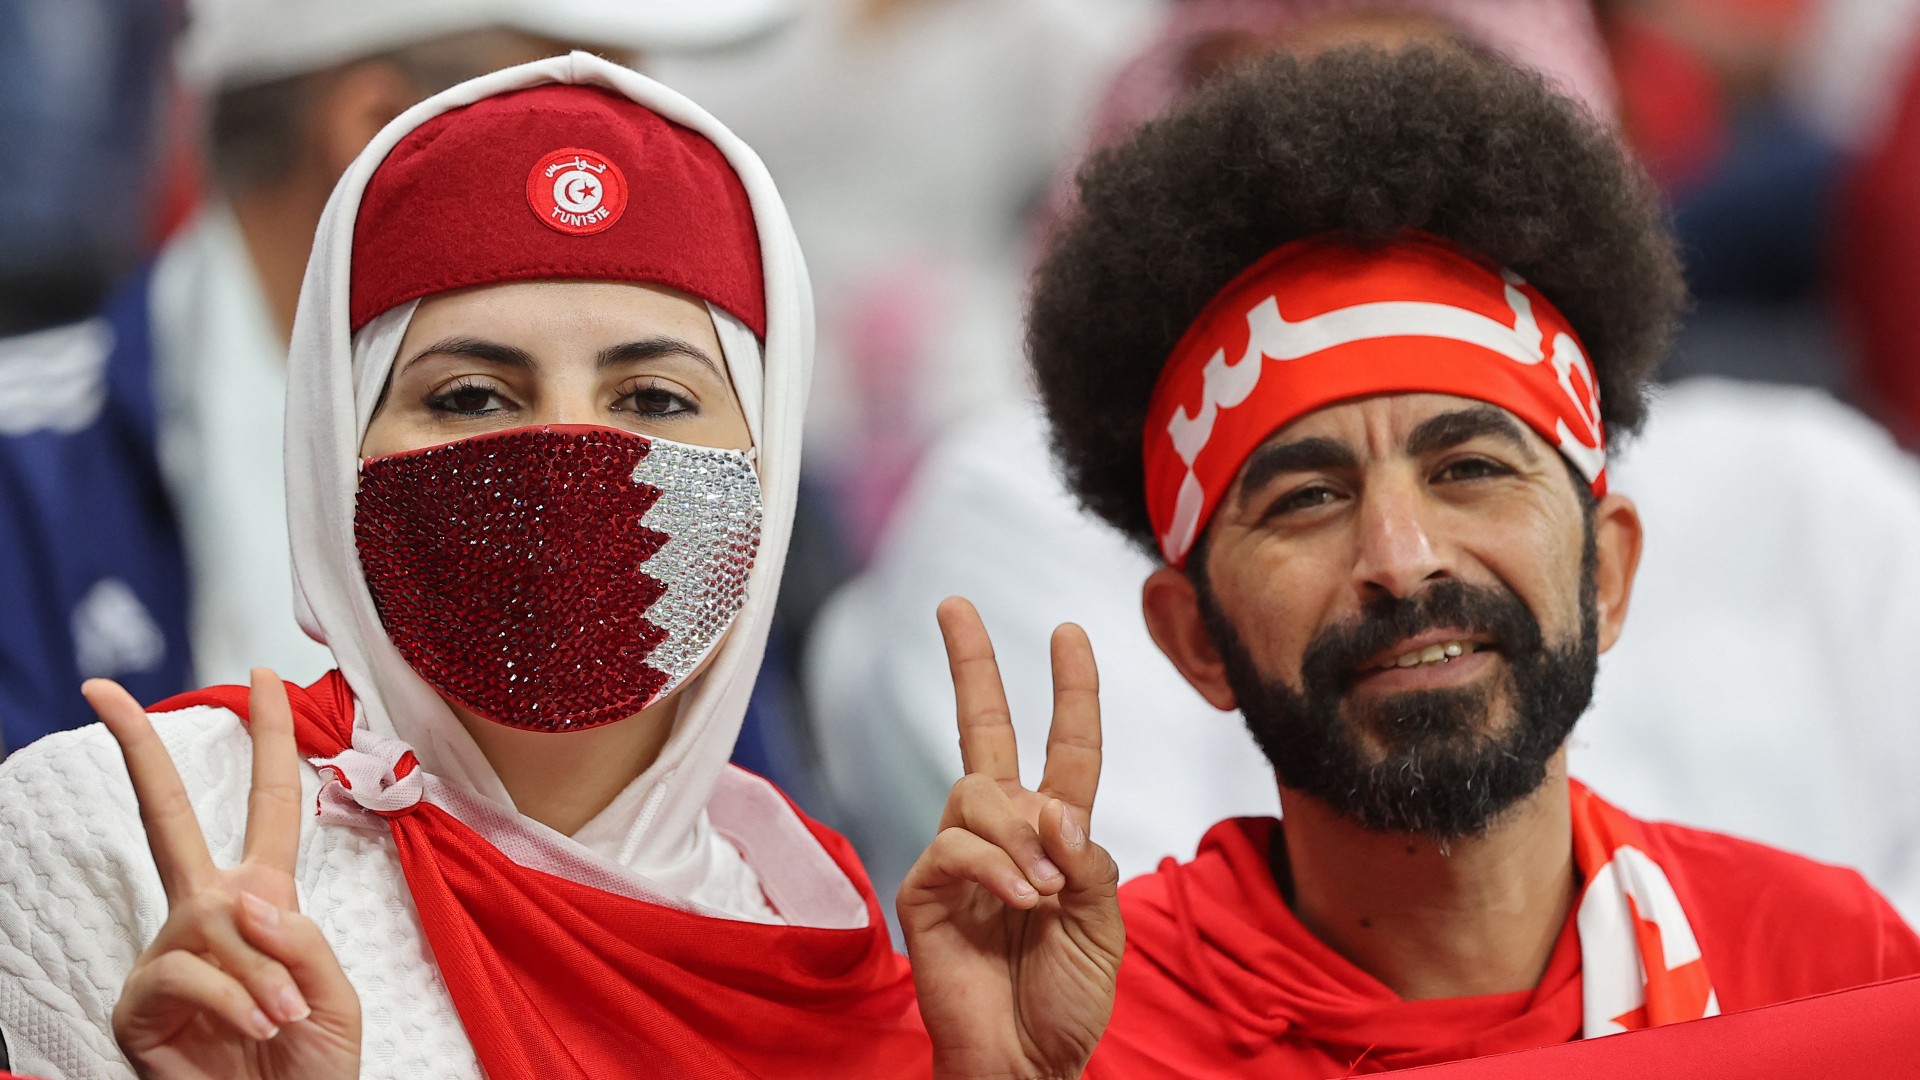 unisia supporters pose for a picture ahead of the FIFA Arab Cup 2021 final football match between Tunisia and Algeria at the Al-Bayt stadium in the Qatari city of Al-Khor on December 18, 2021.